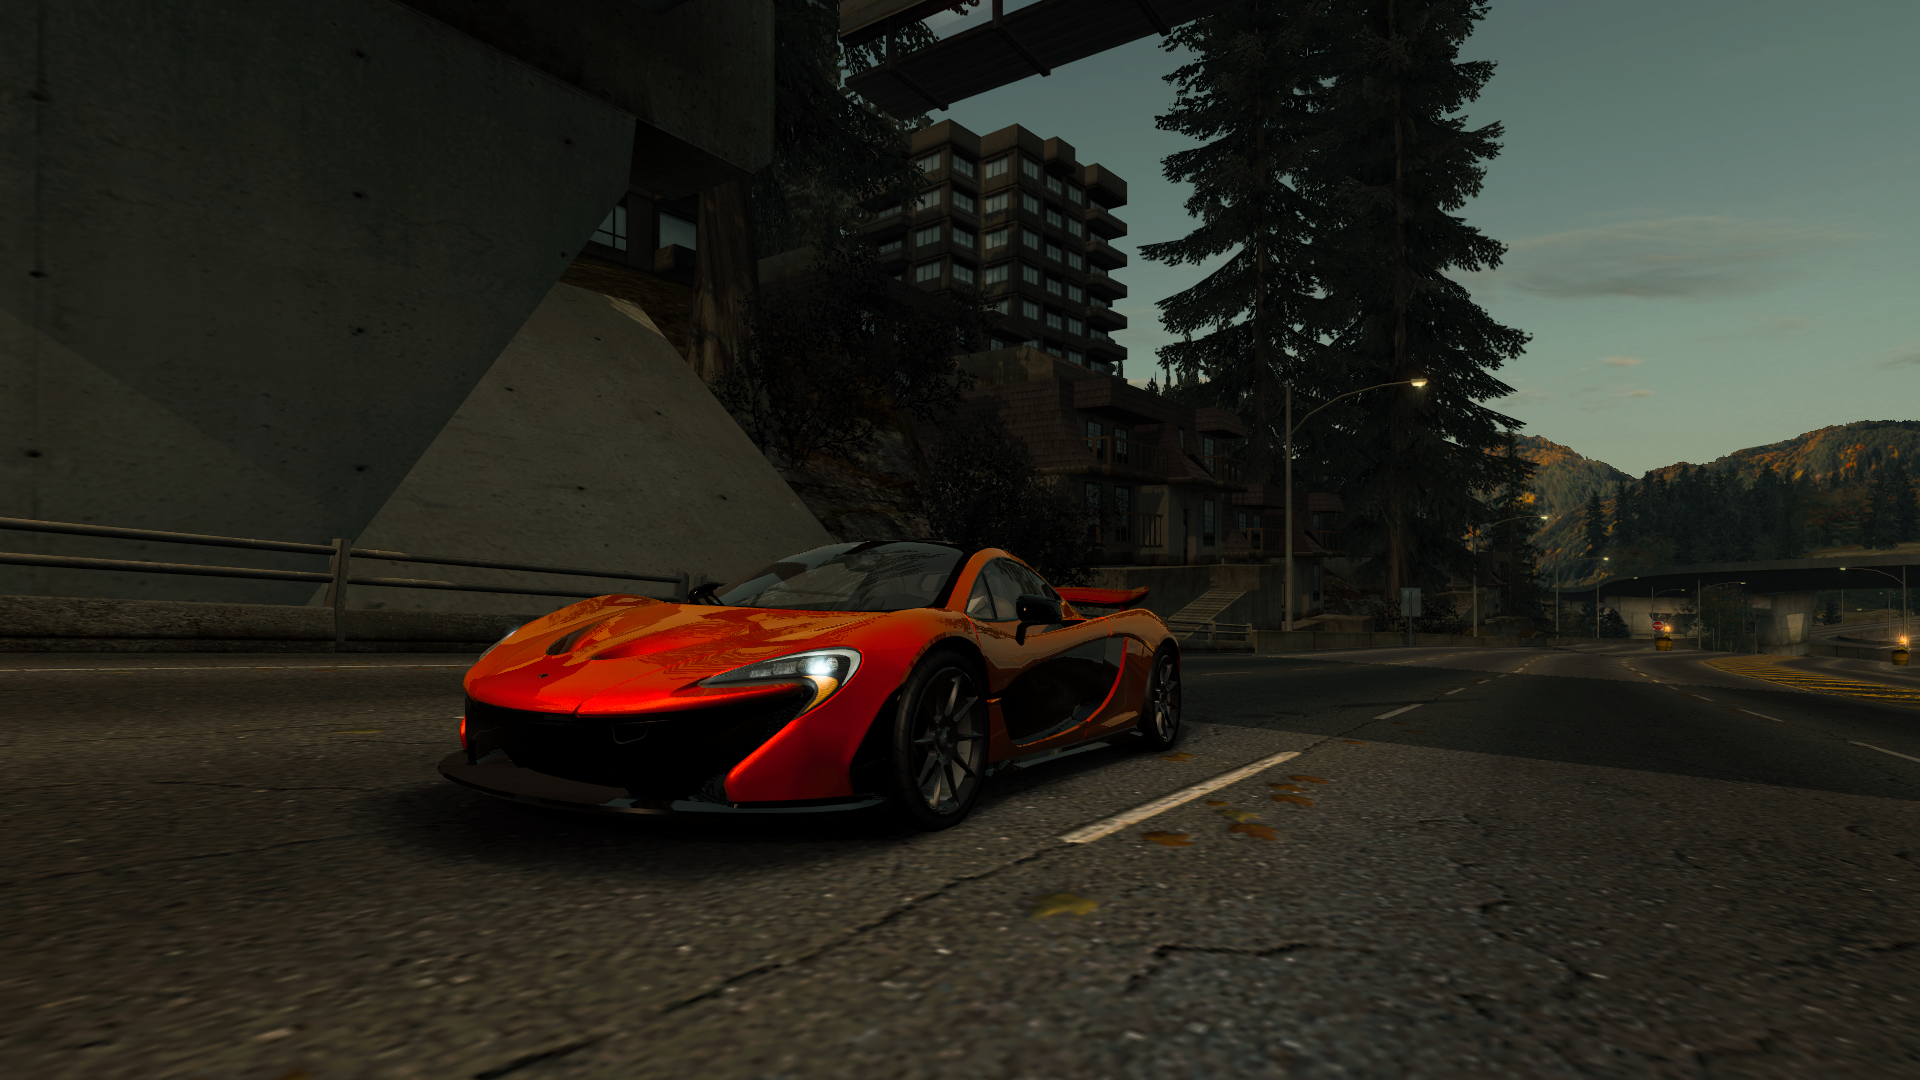 General 1920x1080 Need for Speed: World McLaren P1 supercars video games PC gaming red cars car vehicle screen shot